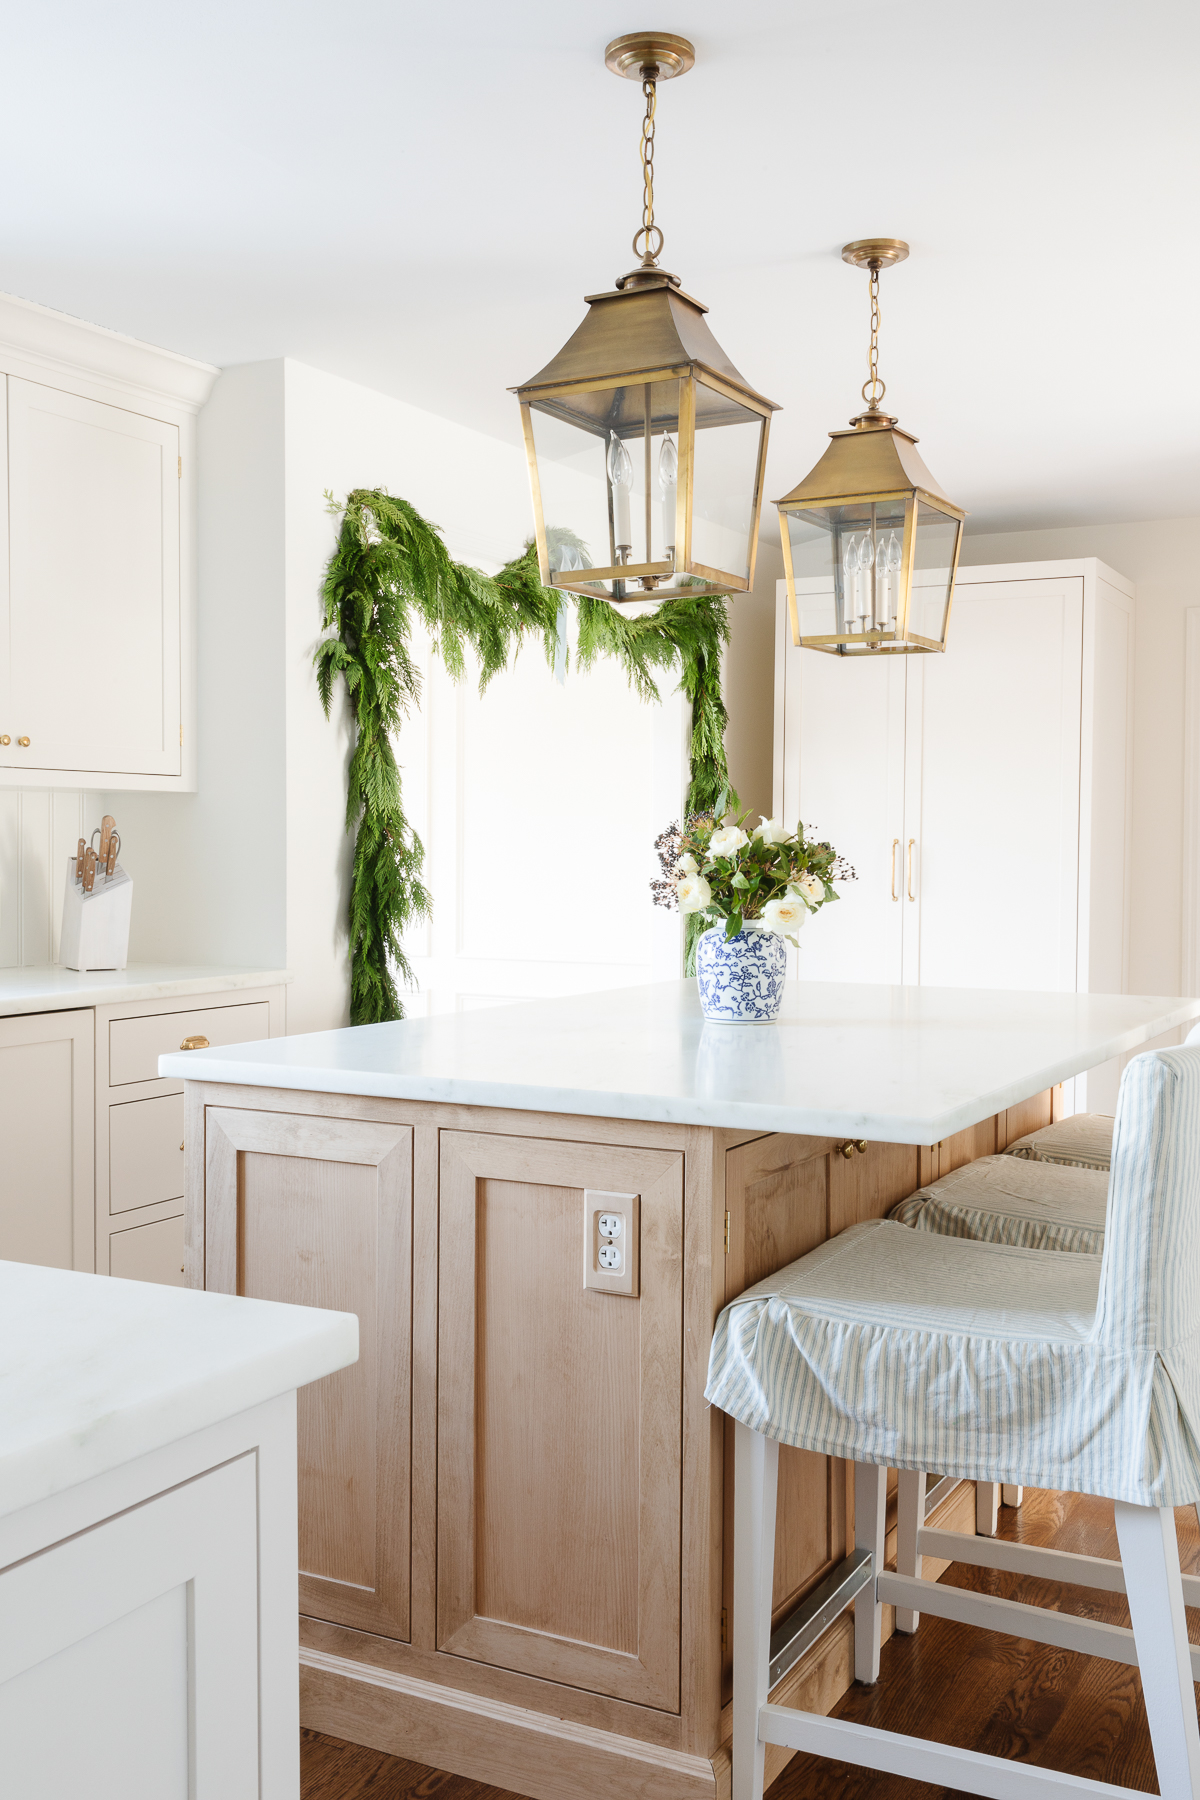 shaker inset cabinets and island with brass lanterns above